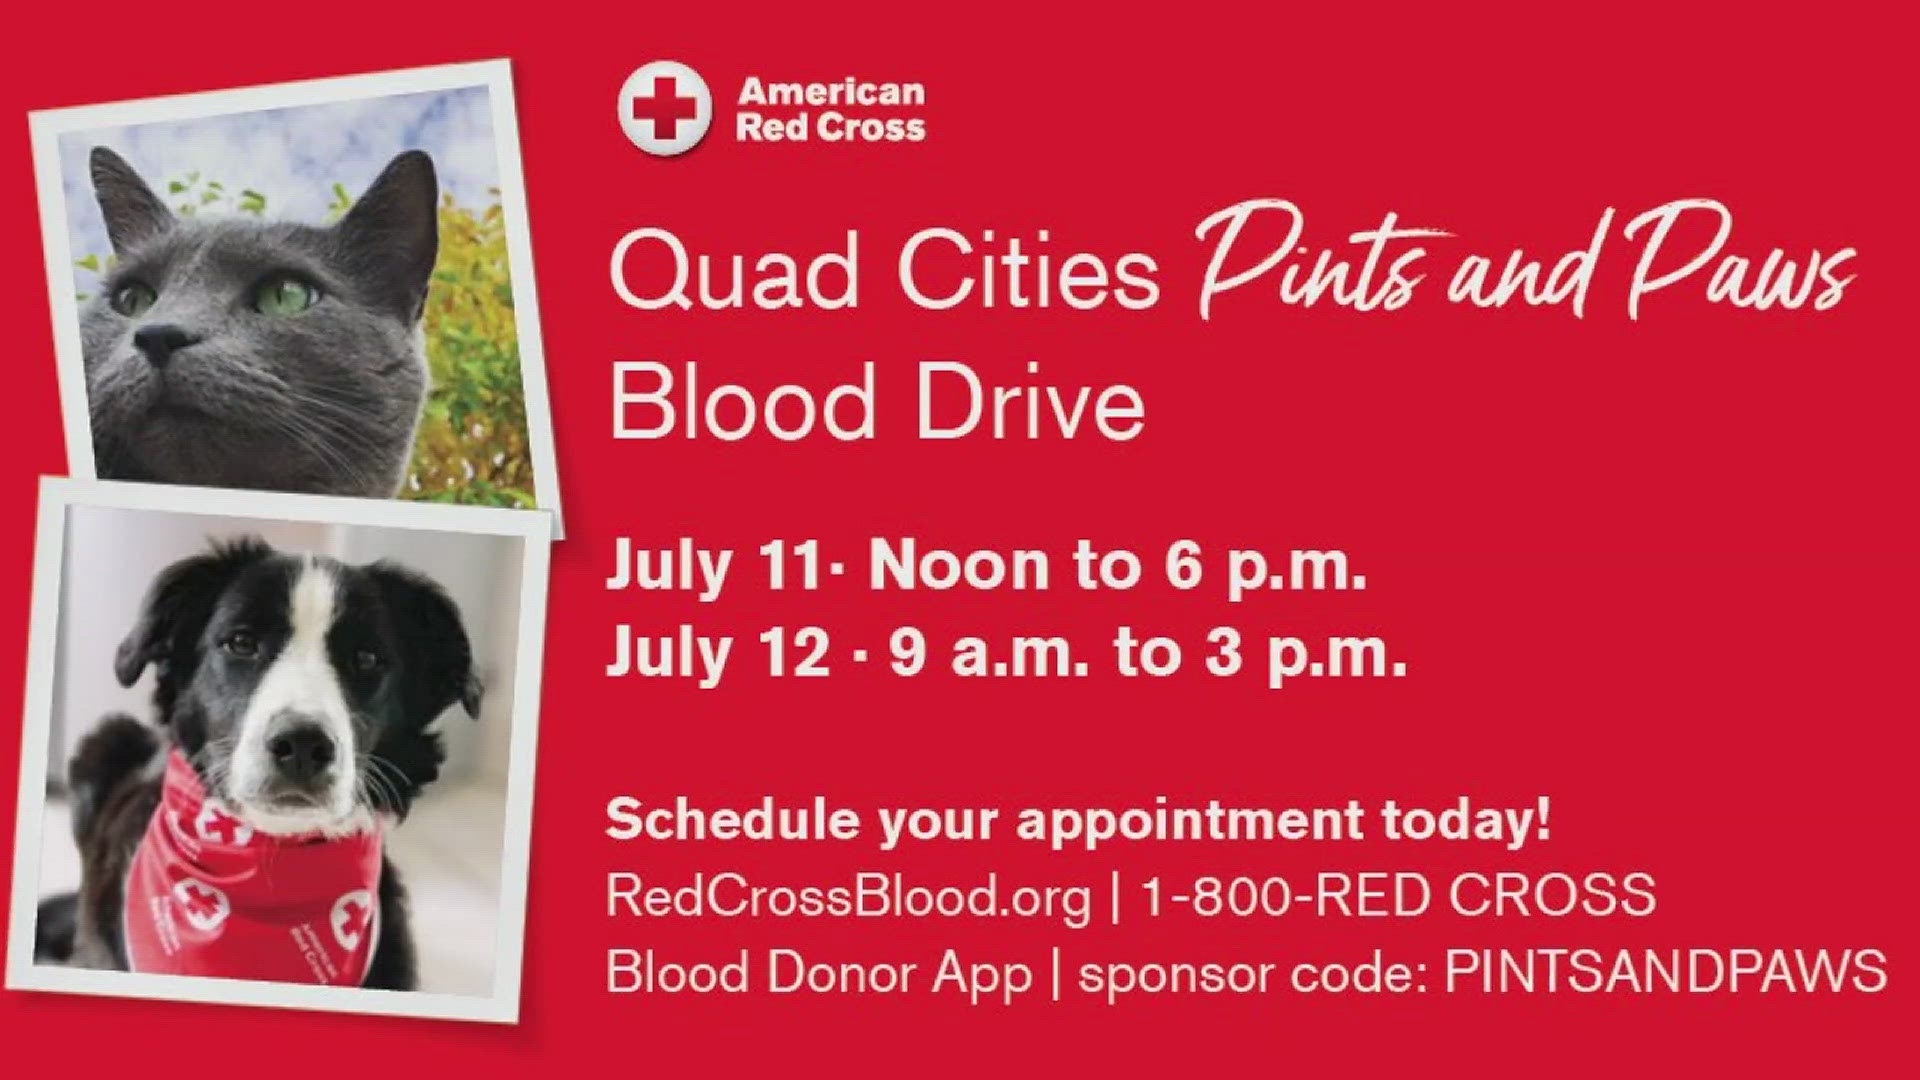 On July 11 and 12, donate blood at one of four Quad Cities locations, and $10 for each donor will be given to four local humane societies.